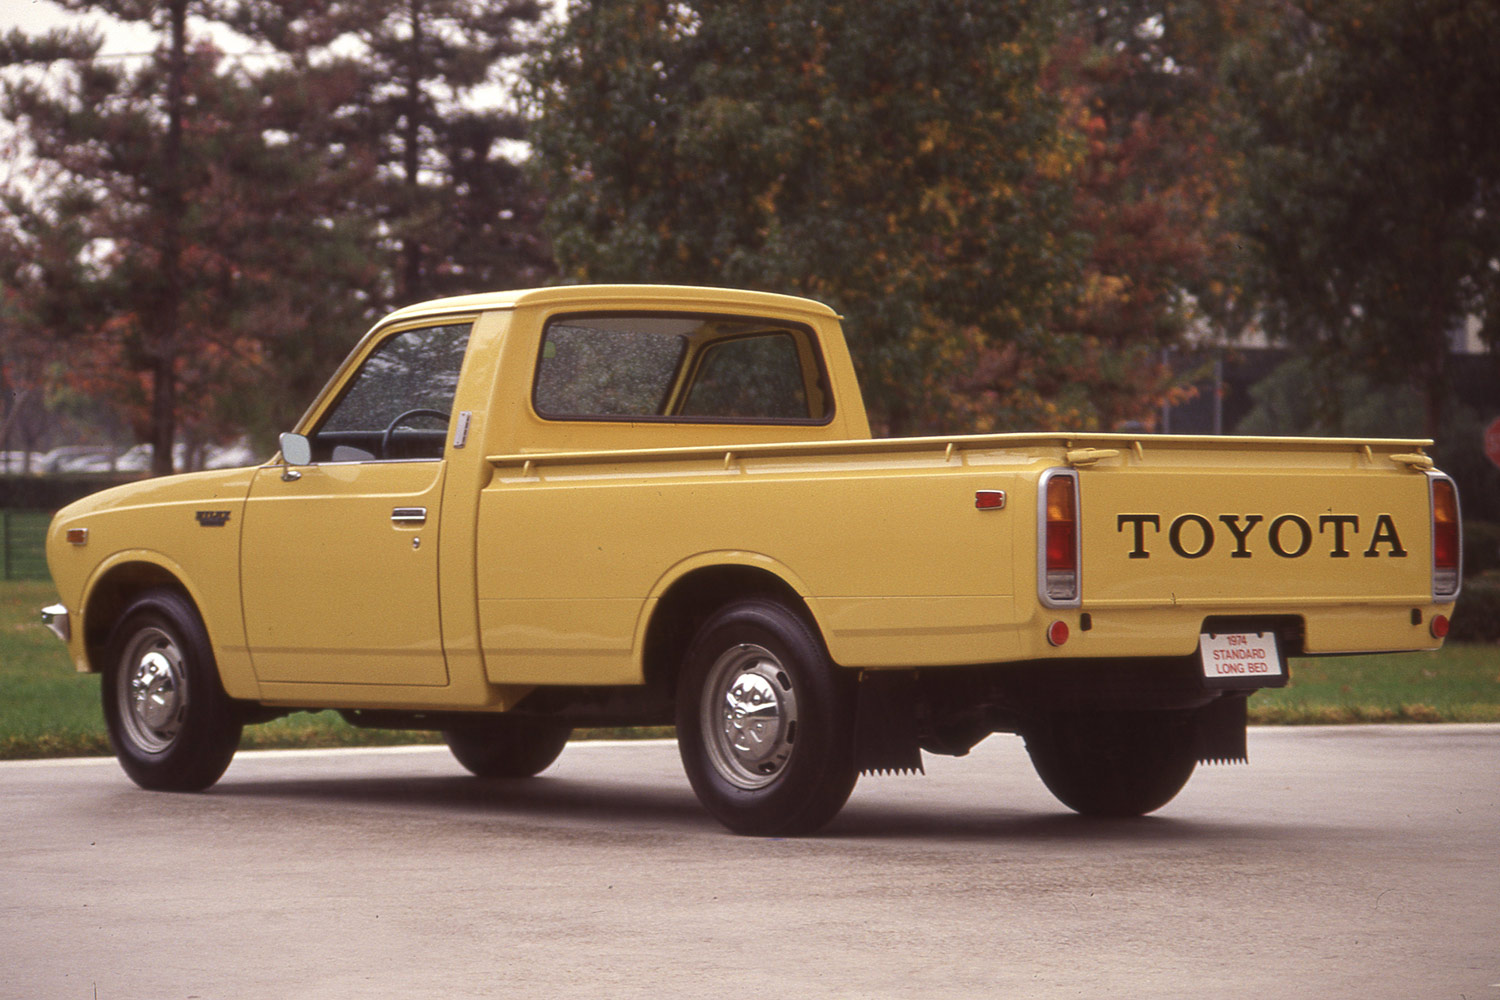 Rear three-quarter view of a yellow 1976 Toyota Hilux, known in the U.S. as the Toyota Pickup